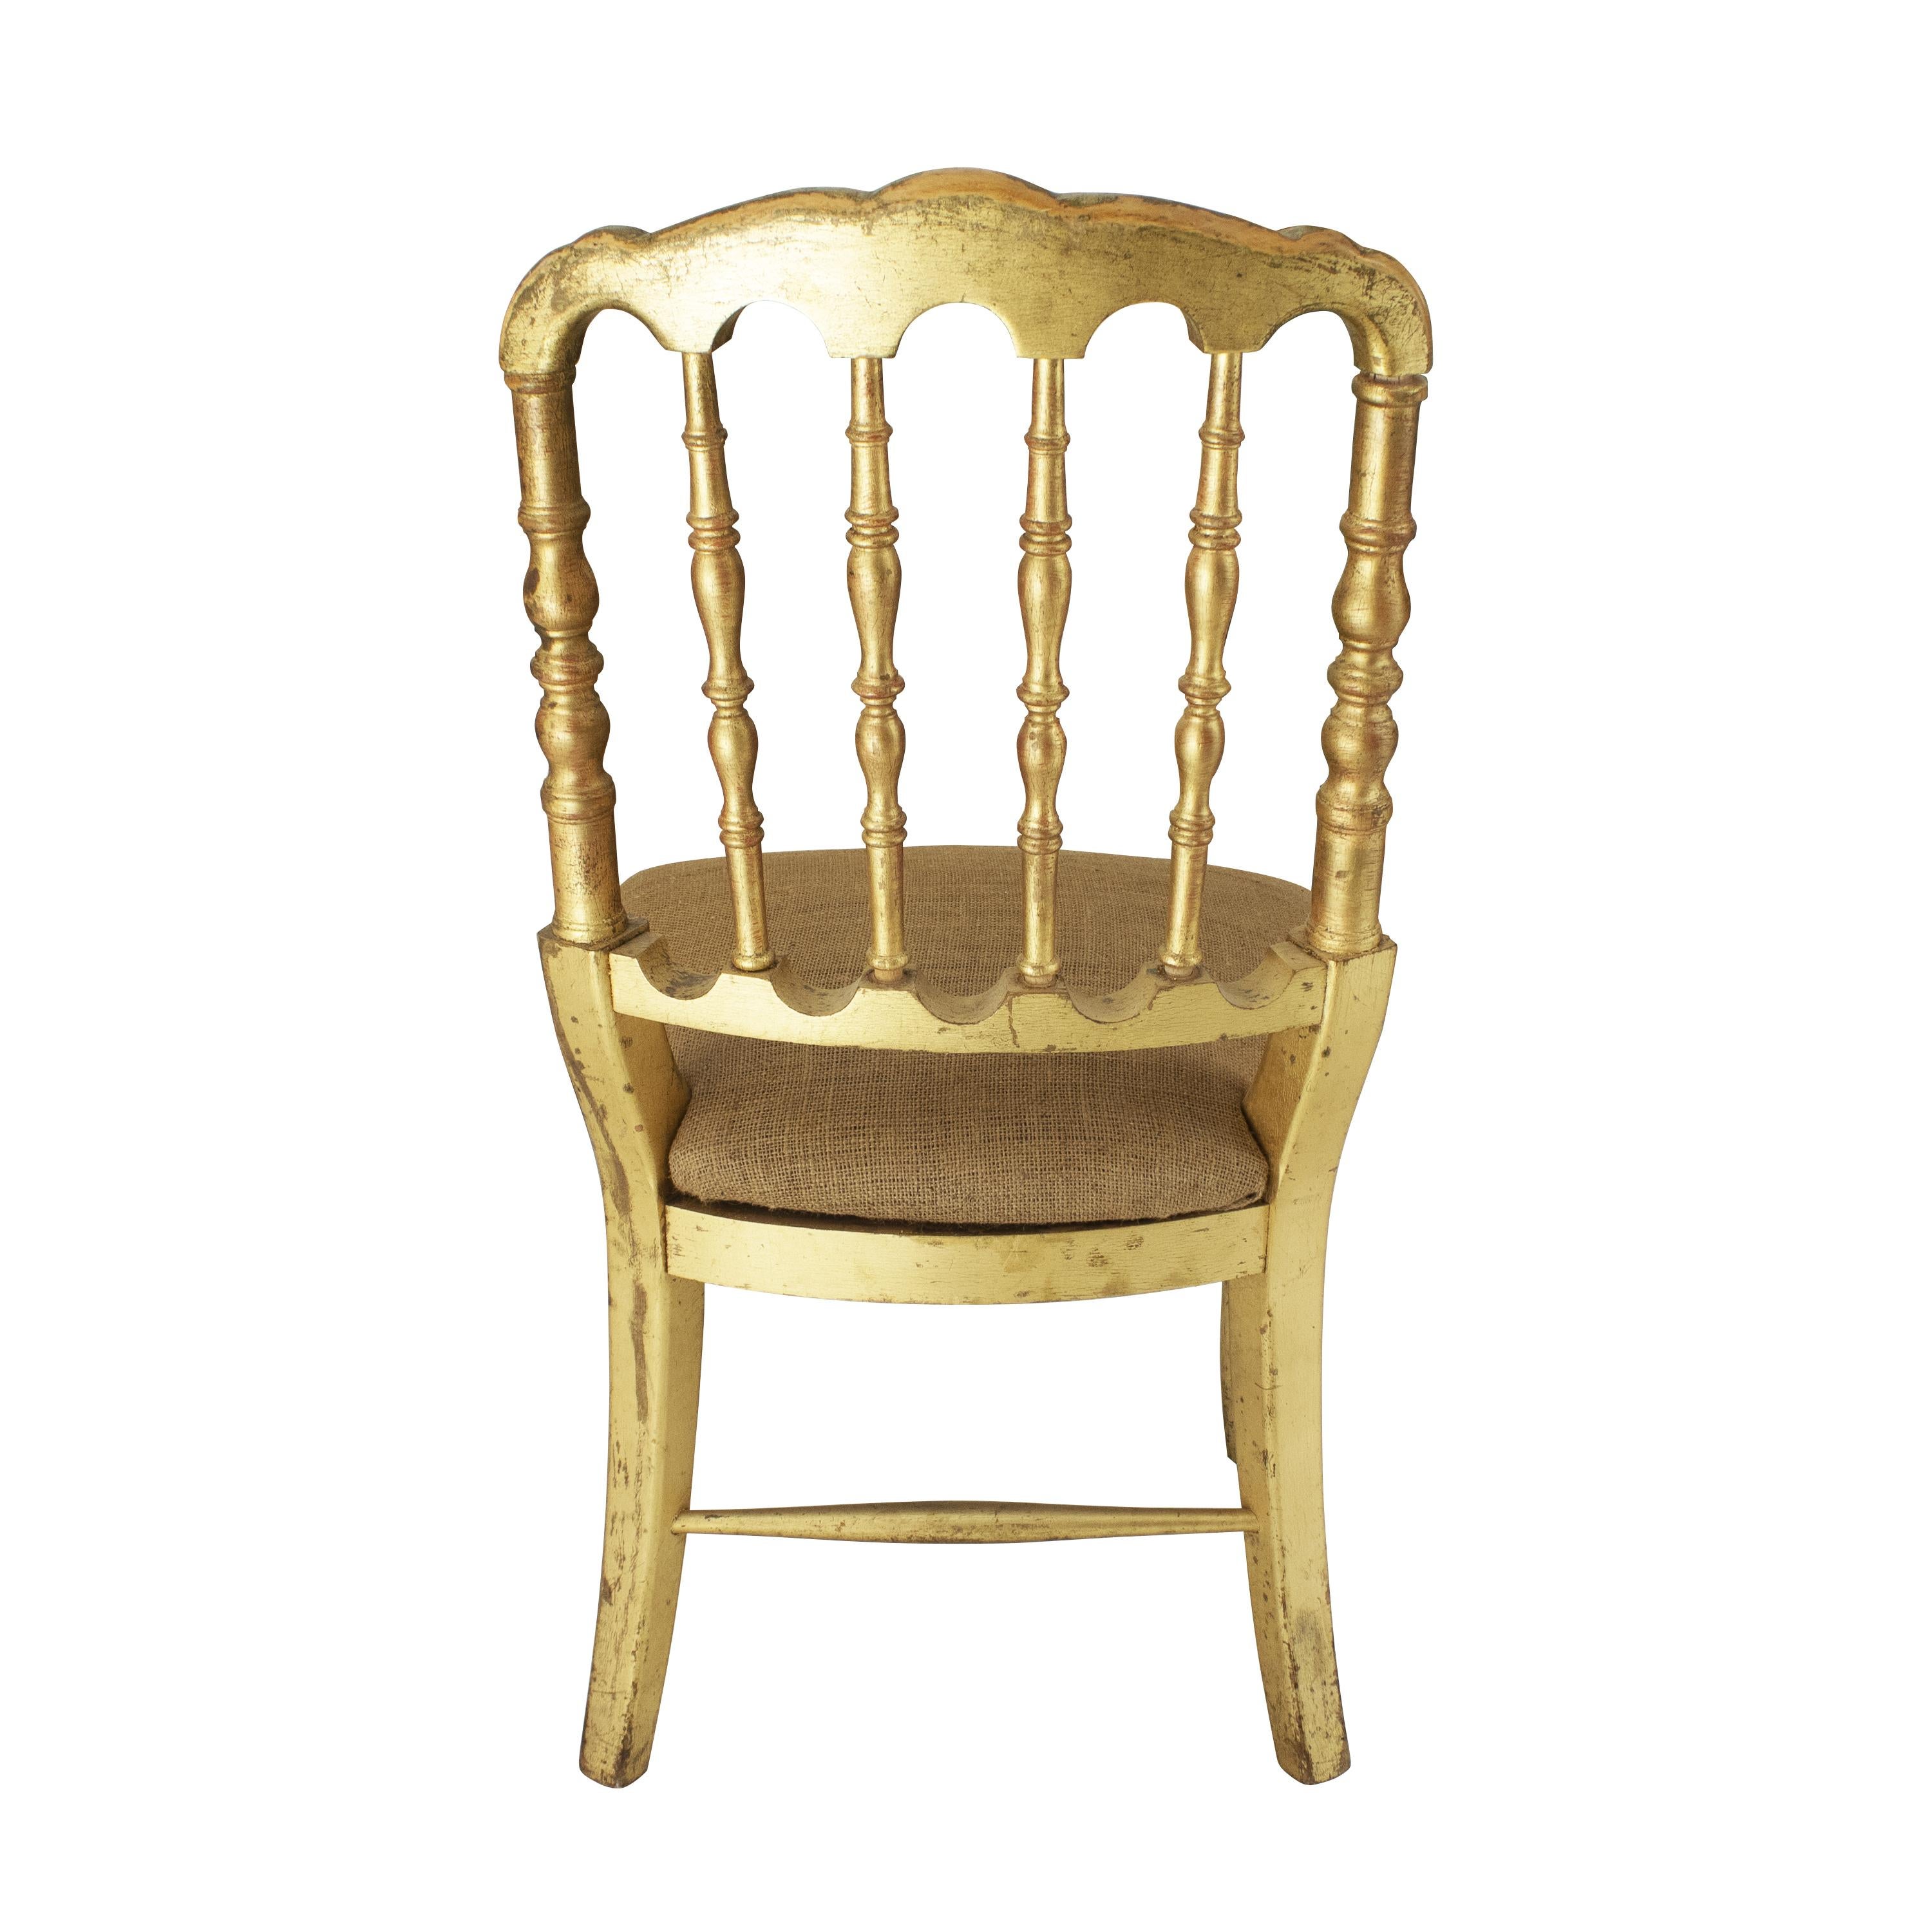 Neoclassical Revival Set of 12 Gold Leaf Tiffany, Chiavari Style Chairs, France, 1960s For Sale